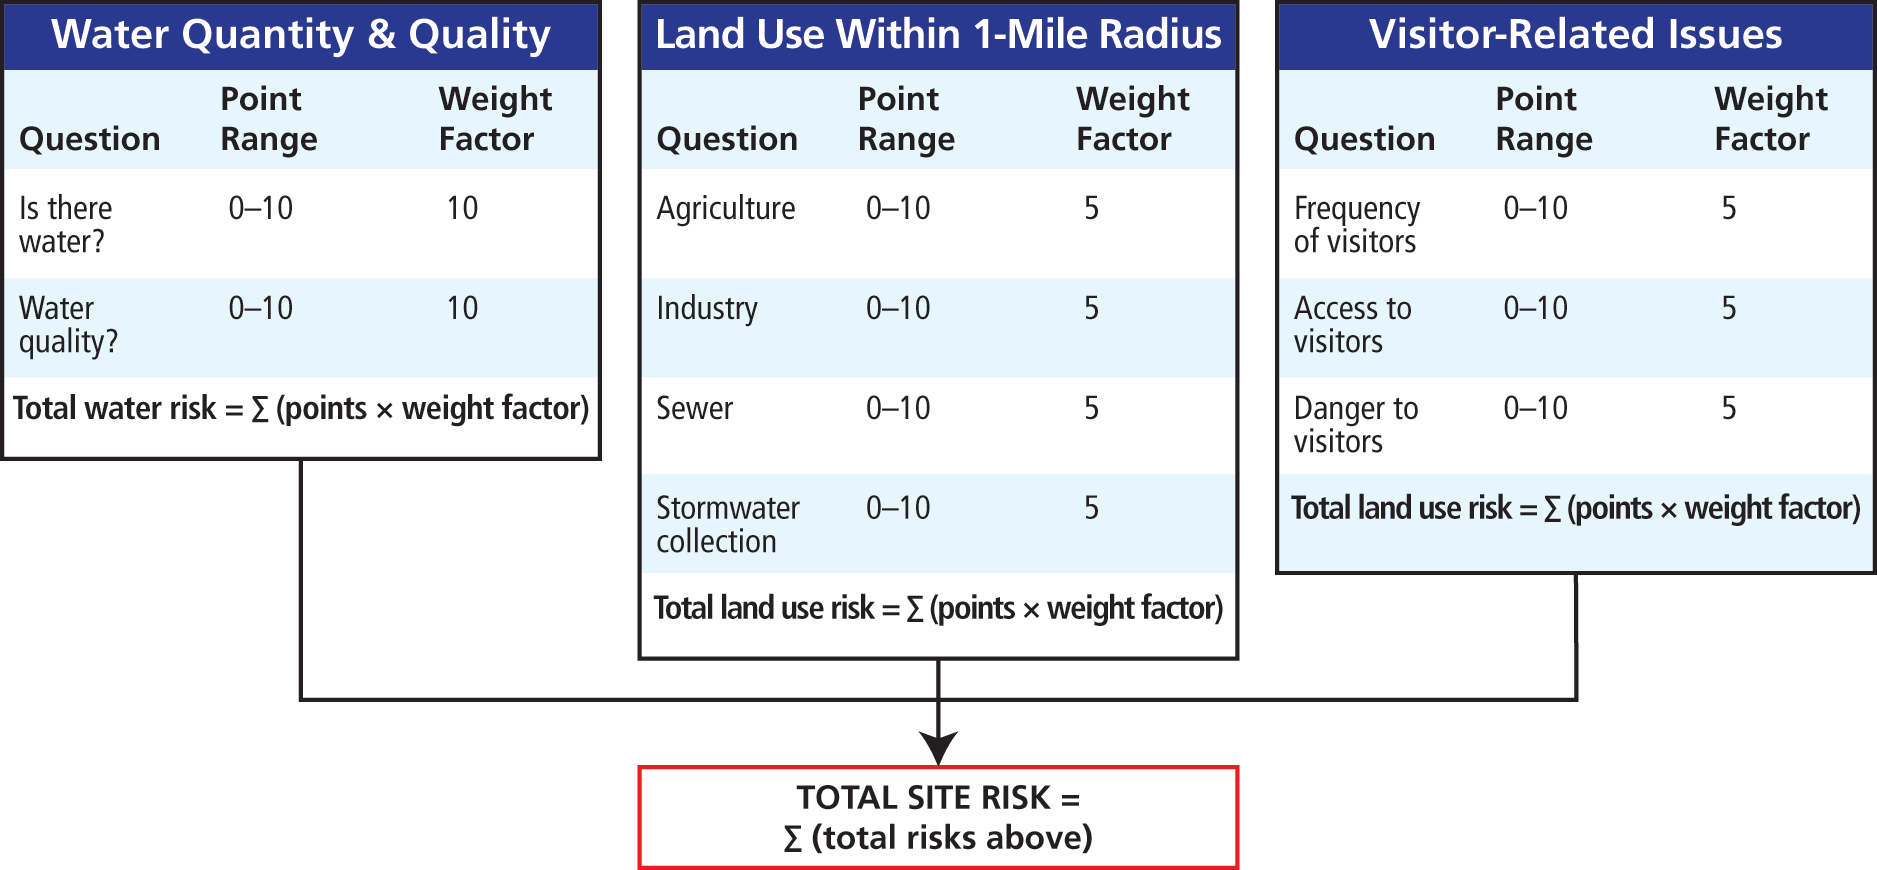 Categories used to calculate relative RISK for each site. Point ranges and weight factors are provided as examples but can be adjusted as needed.